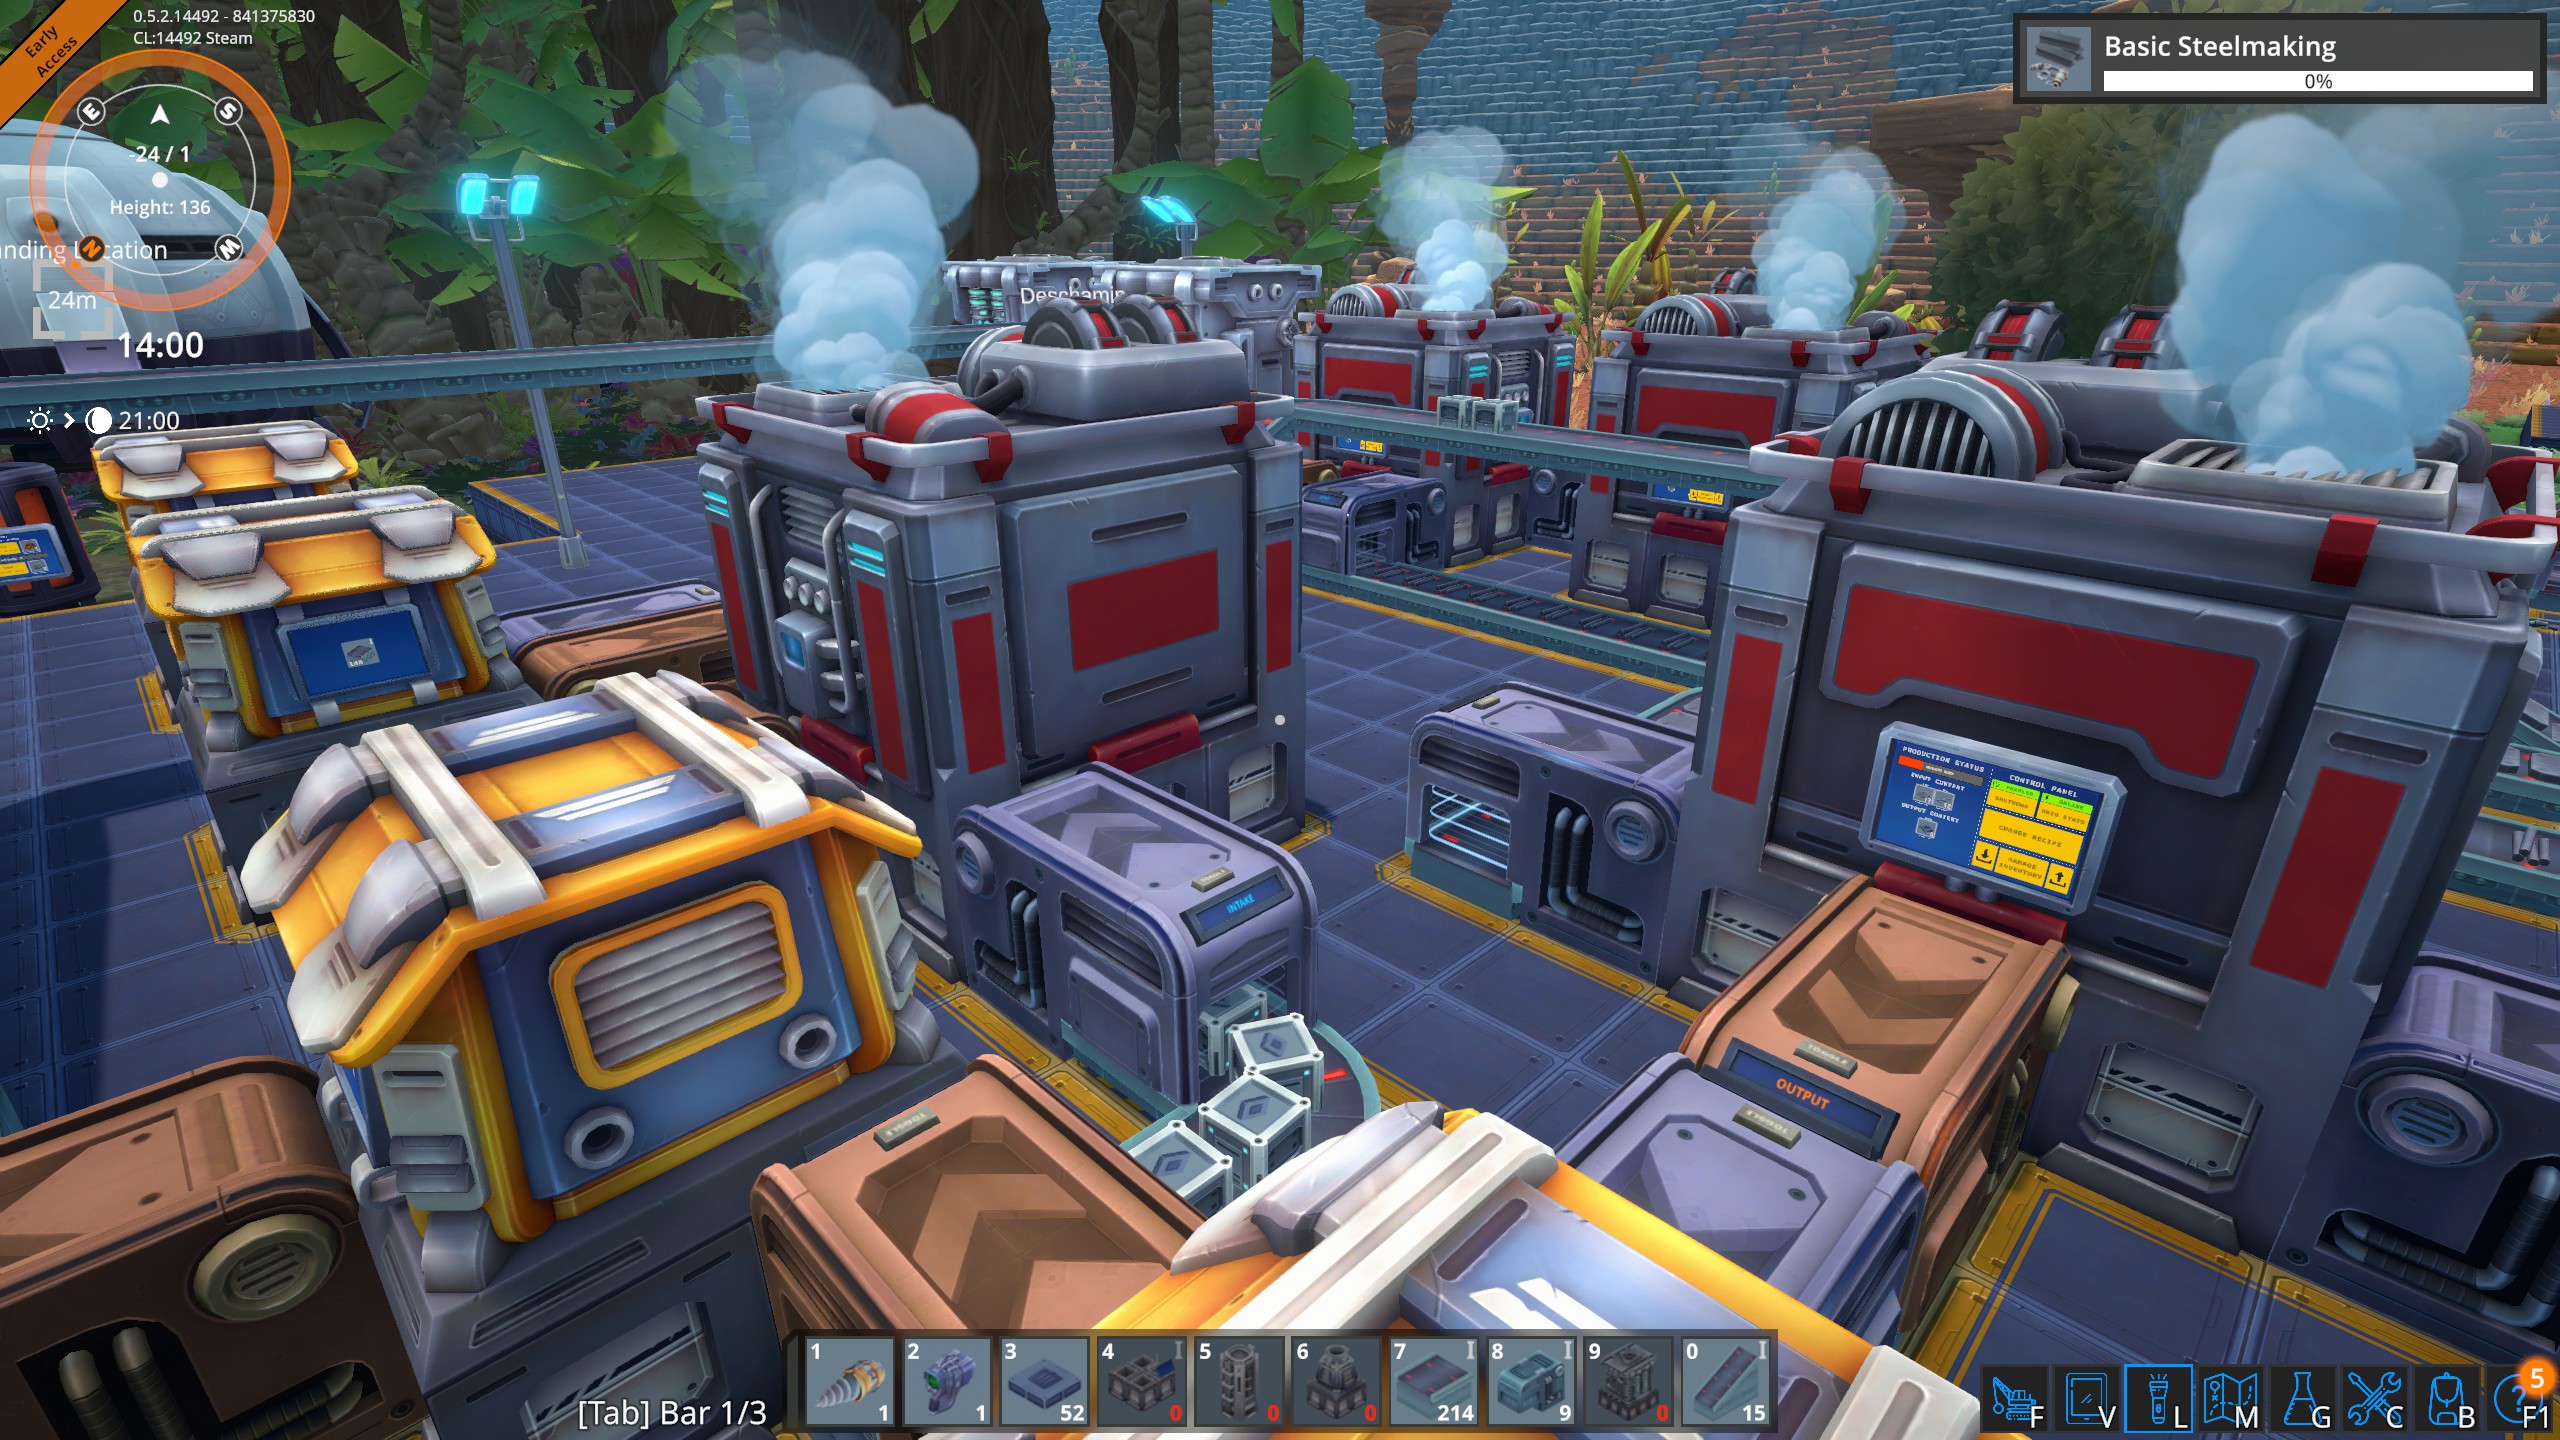 Foundry base building